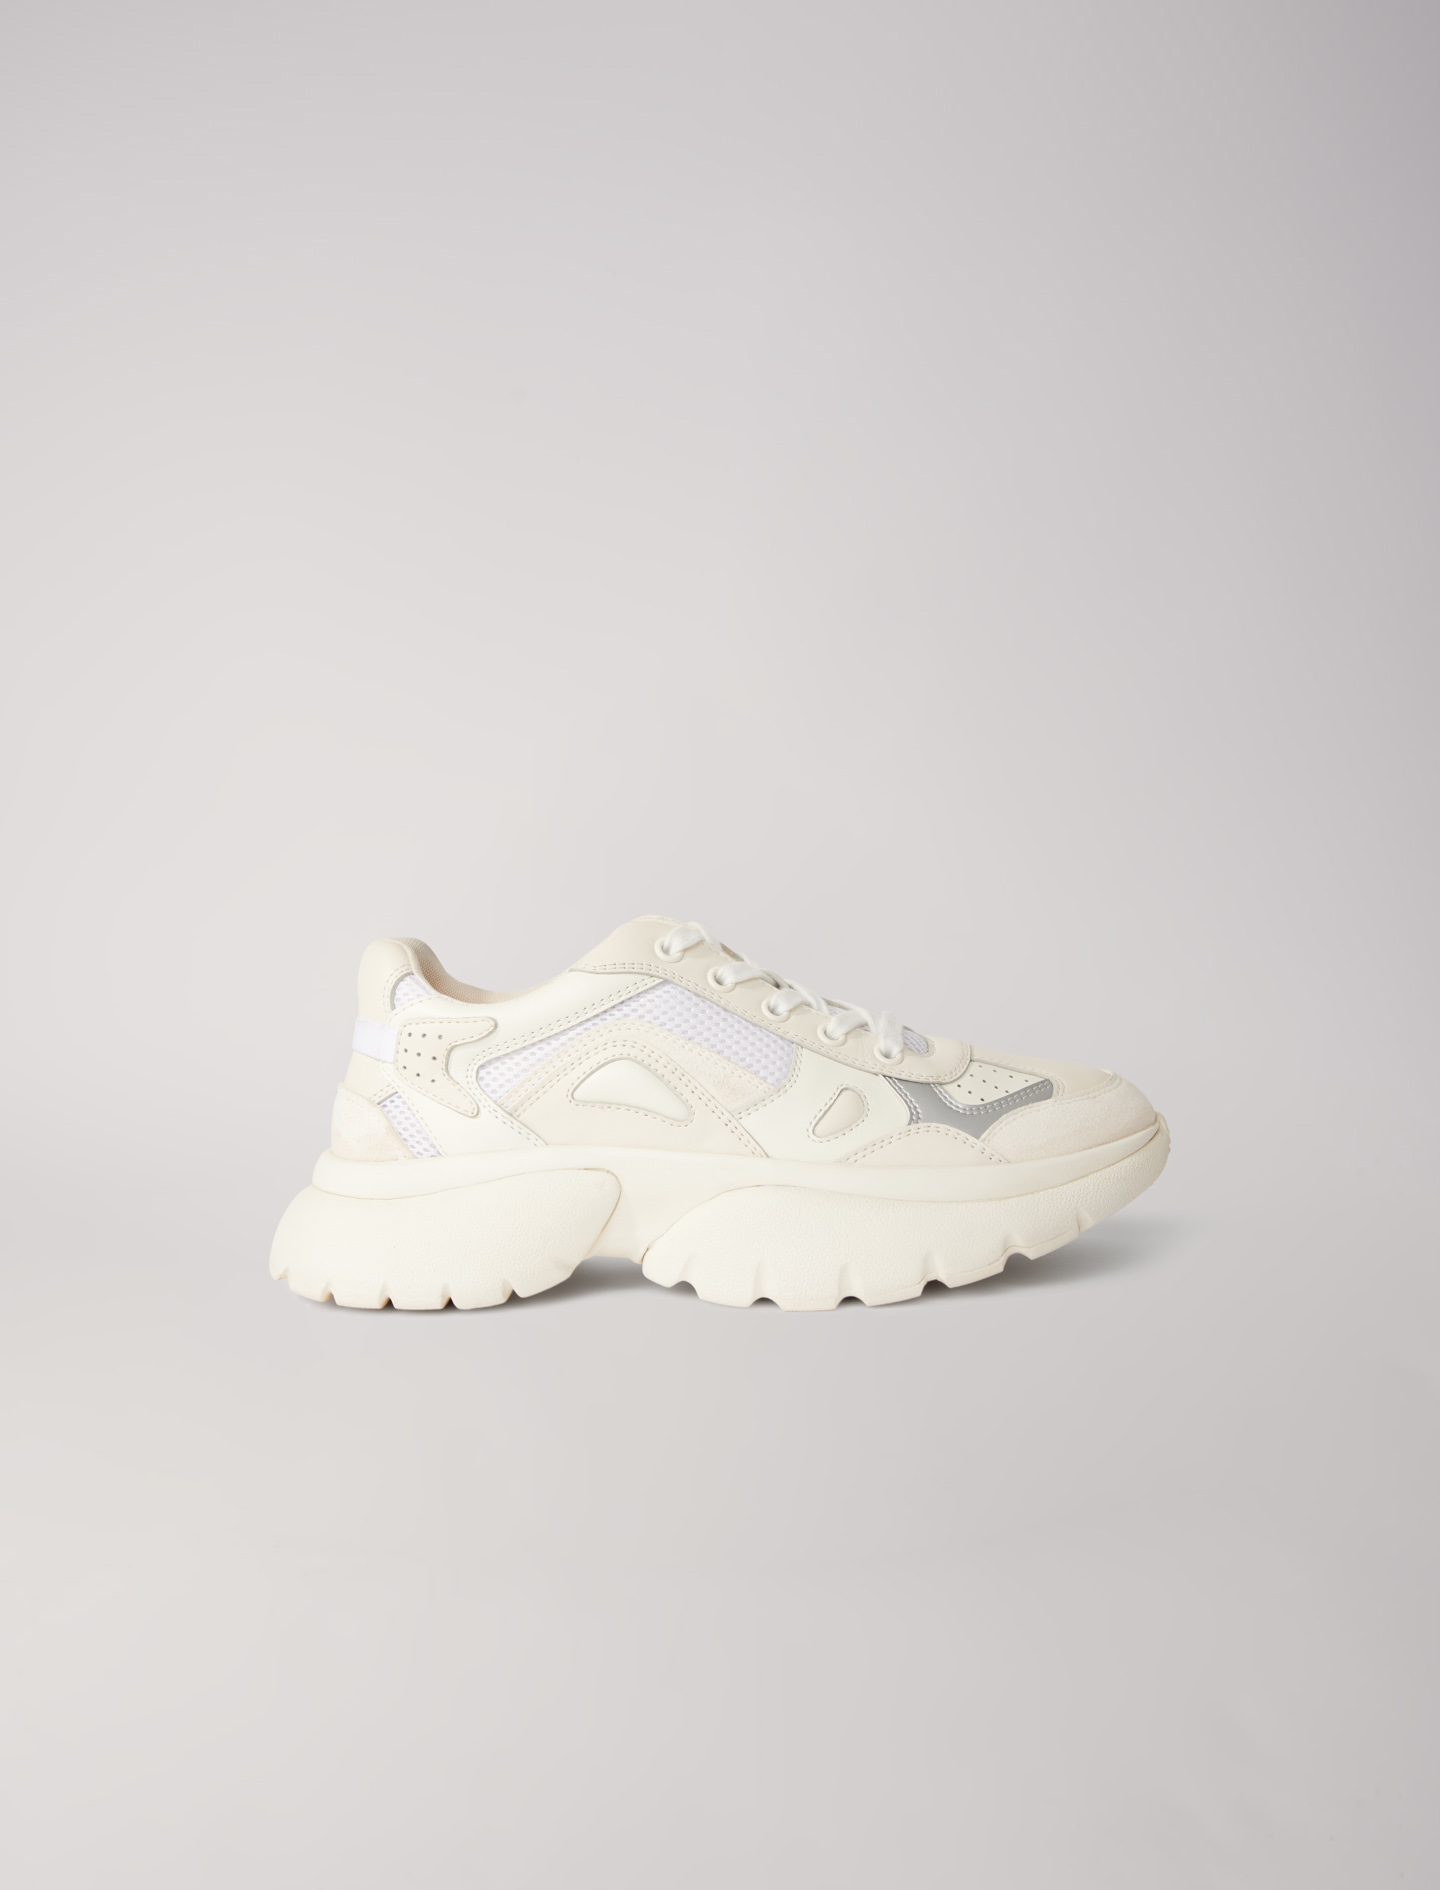 Maje Woman's cotton Outer sole: 123W20NEO for Fall/Winter, in color Off White / White